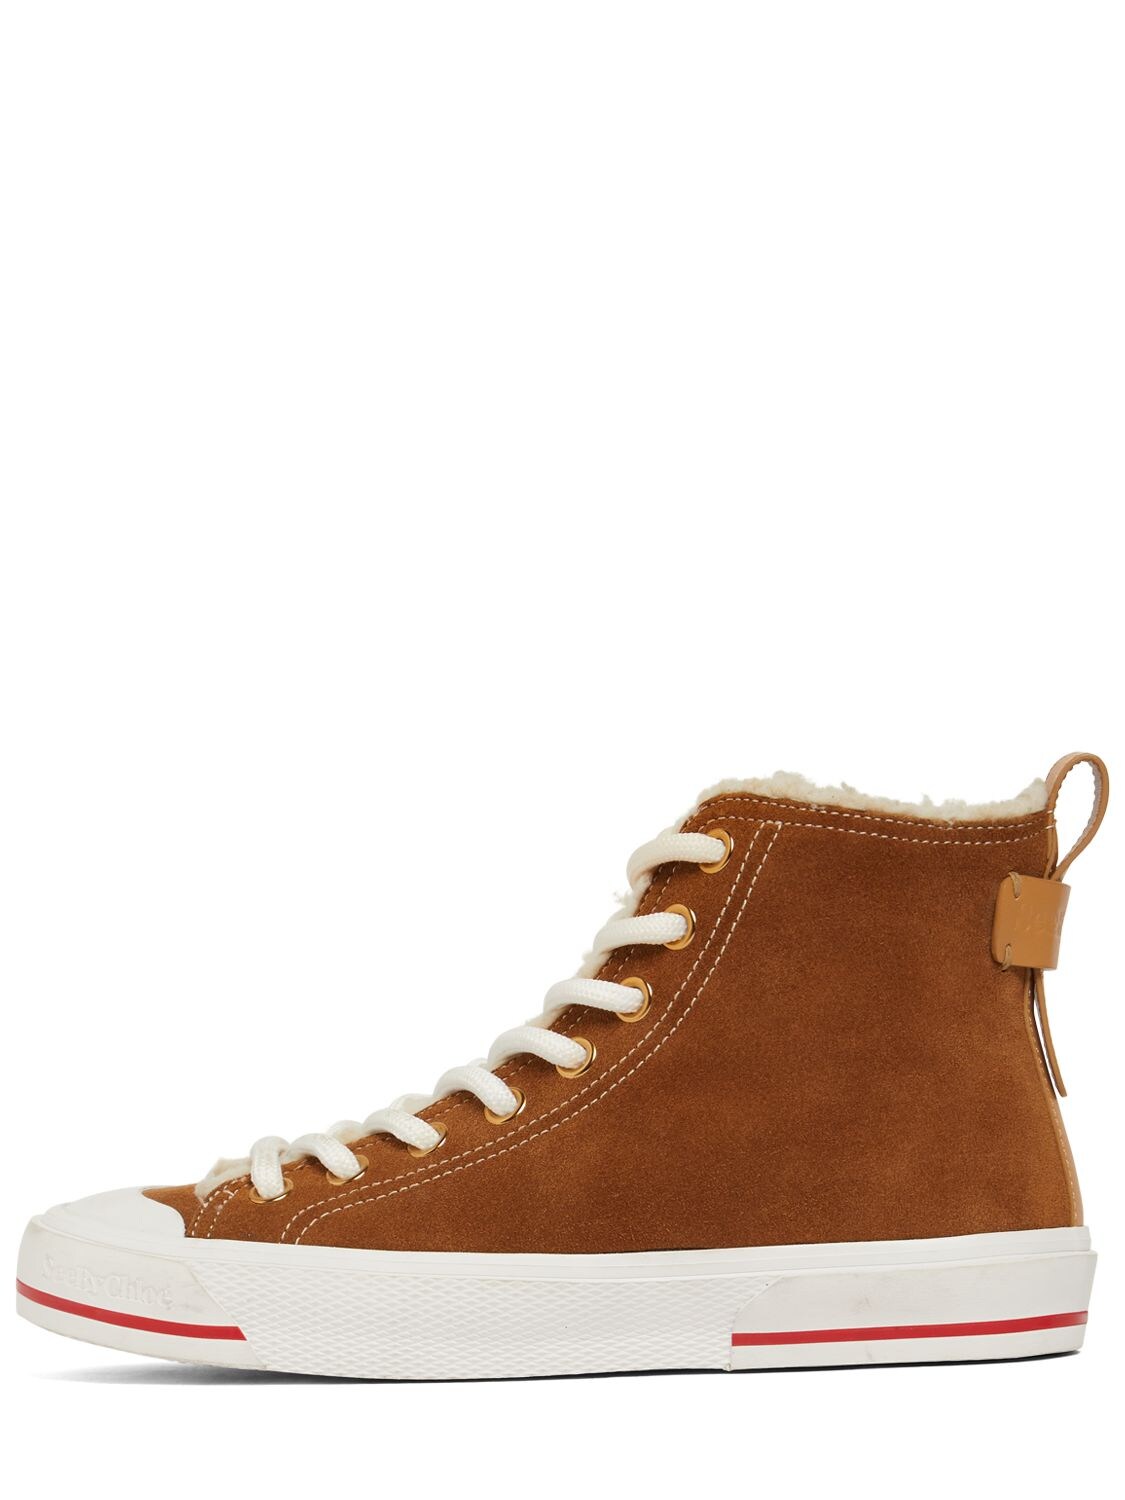 SEE BY CHLOÉ 20MM ARYANA SHEARLING HIGH TOP SNEAKERS